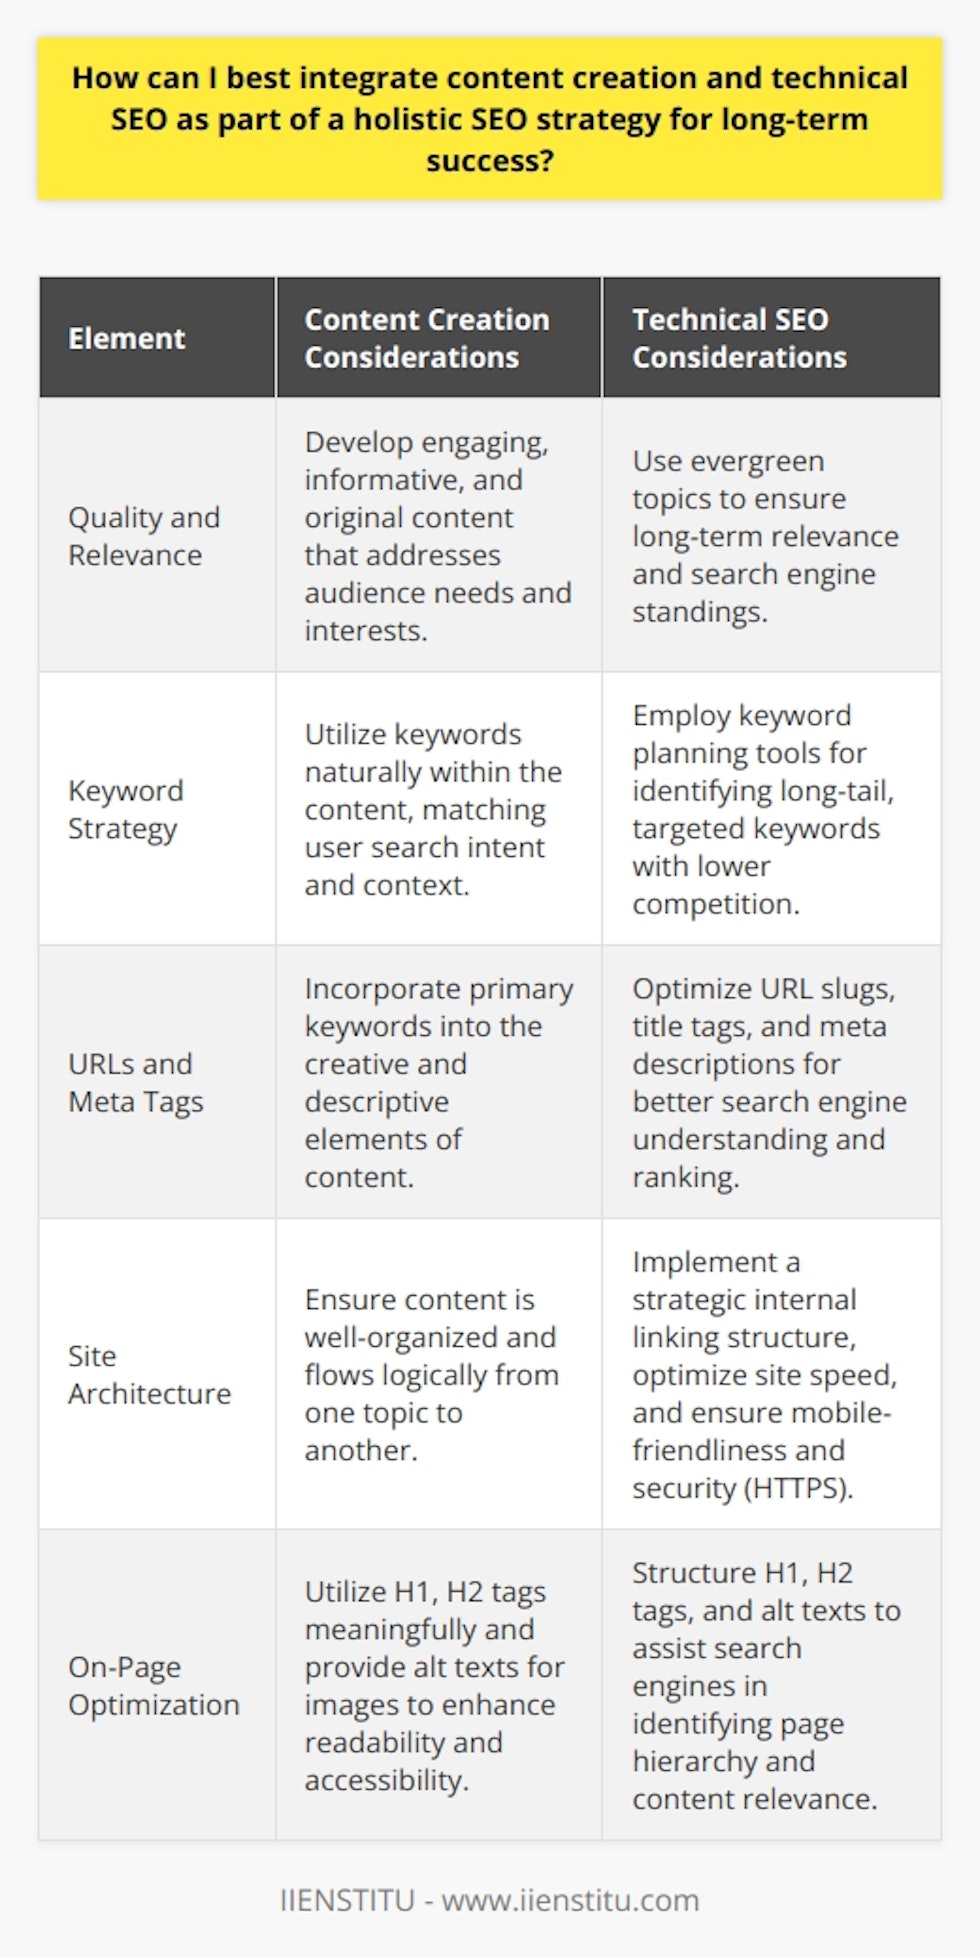 Integrating Content Creation and Technical SEO for Long-term SuccessThe synergy between content creation and technical SEO is crucial in establishing a holistic SEO strategy with the goal of achieving and maintaining long-term success in search engine rankings. Here is an insightful approach on how to merge these two pillars effectively.Crafting High-Quality, Relevant ContentForemost, creating high-quality content that addresses the needs and interests of your intended audience is crucial. This content must not only be informative but also engaging, original, and offer value that is not readily available elsewhere on the internet. Developing a content strategy that focuses on topics with evergreen relevance can ensure your blog remains beneficial to readers over time, thereby keeping the content in good standing with search engines.Strategic Implementation of KeywordsKeywords are the lynchpins of content optimization; however, their usage must be nuanced and context-driven. The days of keyword stuffing are long gone, now they must be woven into content naturally, aligning with user search intent. Tools for keyword planning can help identify long-tail keywords that can attract a more targeted audience and be less competitive, bringing a balanced approach to attracting traffic.Advanced Technical SEO TacticsWhile the content draws readers, technical SEO ensures they can find and access your work. Incorporating primary keywords into your blog post’s URL, title tags, and meta descriptions signals to search engines what the page is about. Furthermore, site speed optimization, mobile-friendliness, and a secure connection (HTTPS) are crucial factors that affect how search engines rank your pages.Enhancement of On-Page SEO ElementsOn-page elements such as H1, H2 tags, image alt texts for accessibility, and a logically structured internal linking strategy play a crucial role in SEO. They guide search engines through the relevance and hierarchy of your content and can help distribute page authority throughout your website.A Delicate BalanceA robust SEO strategy necessitates a delicate balance between compelling content and the technical nuance that empowers it to be discovered. Your content's depth and accessibility are pointless without indexing and crawlability, just as the highest level of technical optimization has limited impact without remarkable content to back it up.To thrive in the competitive landscape of SEO, it is essential for creators to aim for a marriage of high-quality, insightful content with impeccable technical underpinnings. Adopting the mindset of satisfying both the audience’s and search engines’ requirements will pave the way for sustained online visibility and success. This holistic SEO approach integrates both the art of content creation and the science of technical SEO for a synergistic effect that extends beyond temporary gains, towards building a lasting presence in the digital realm.